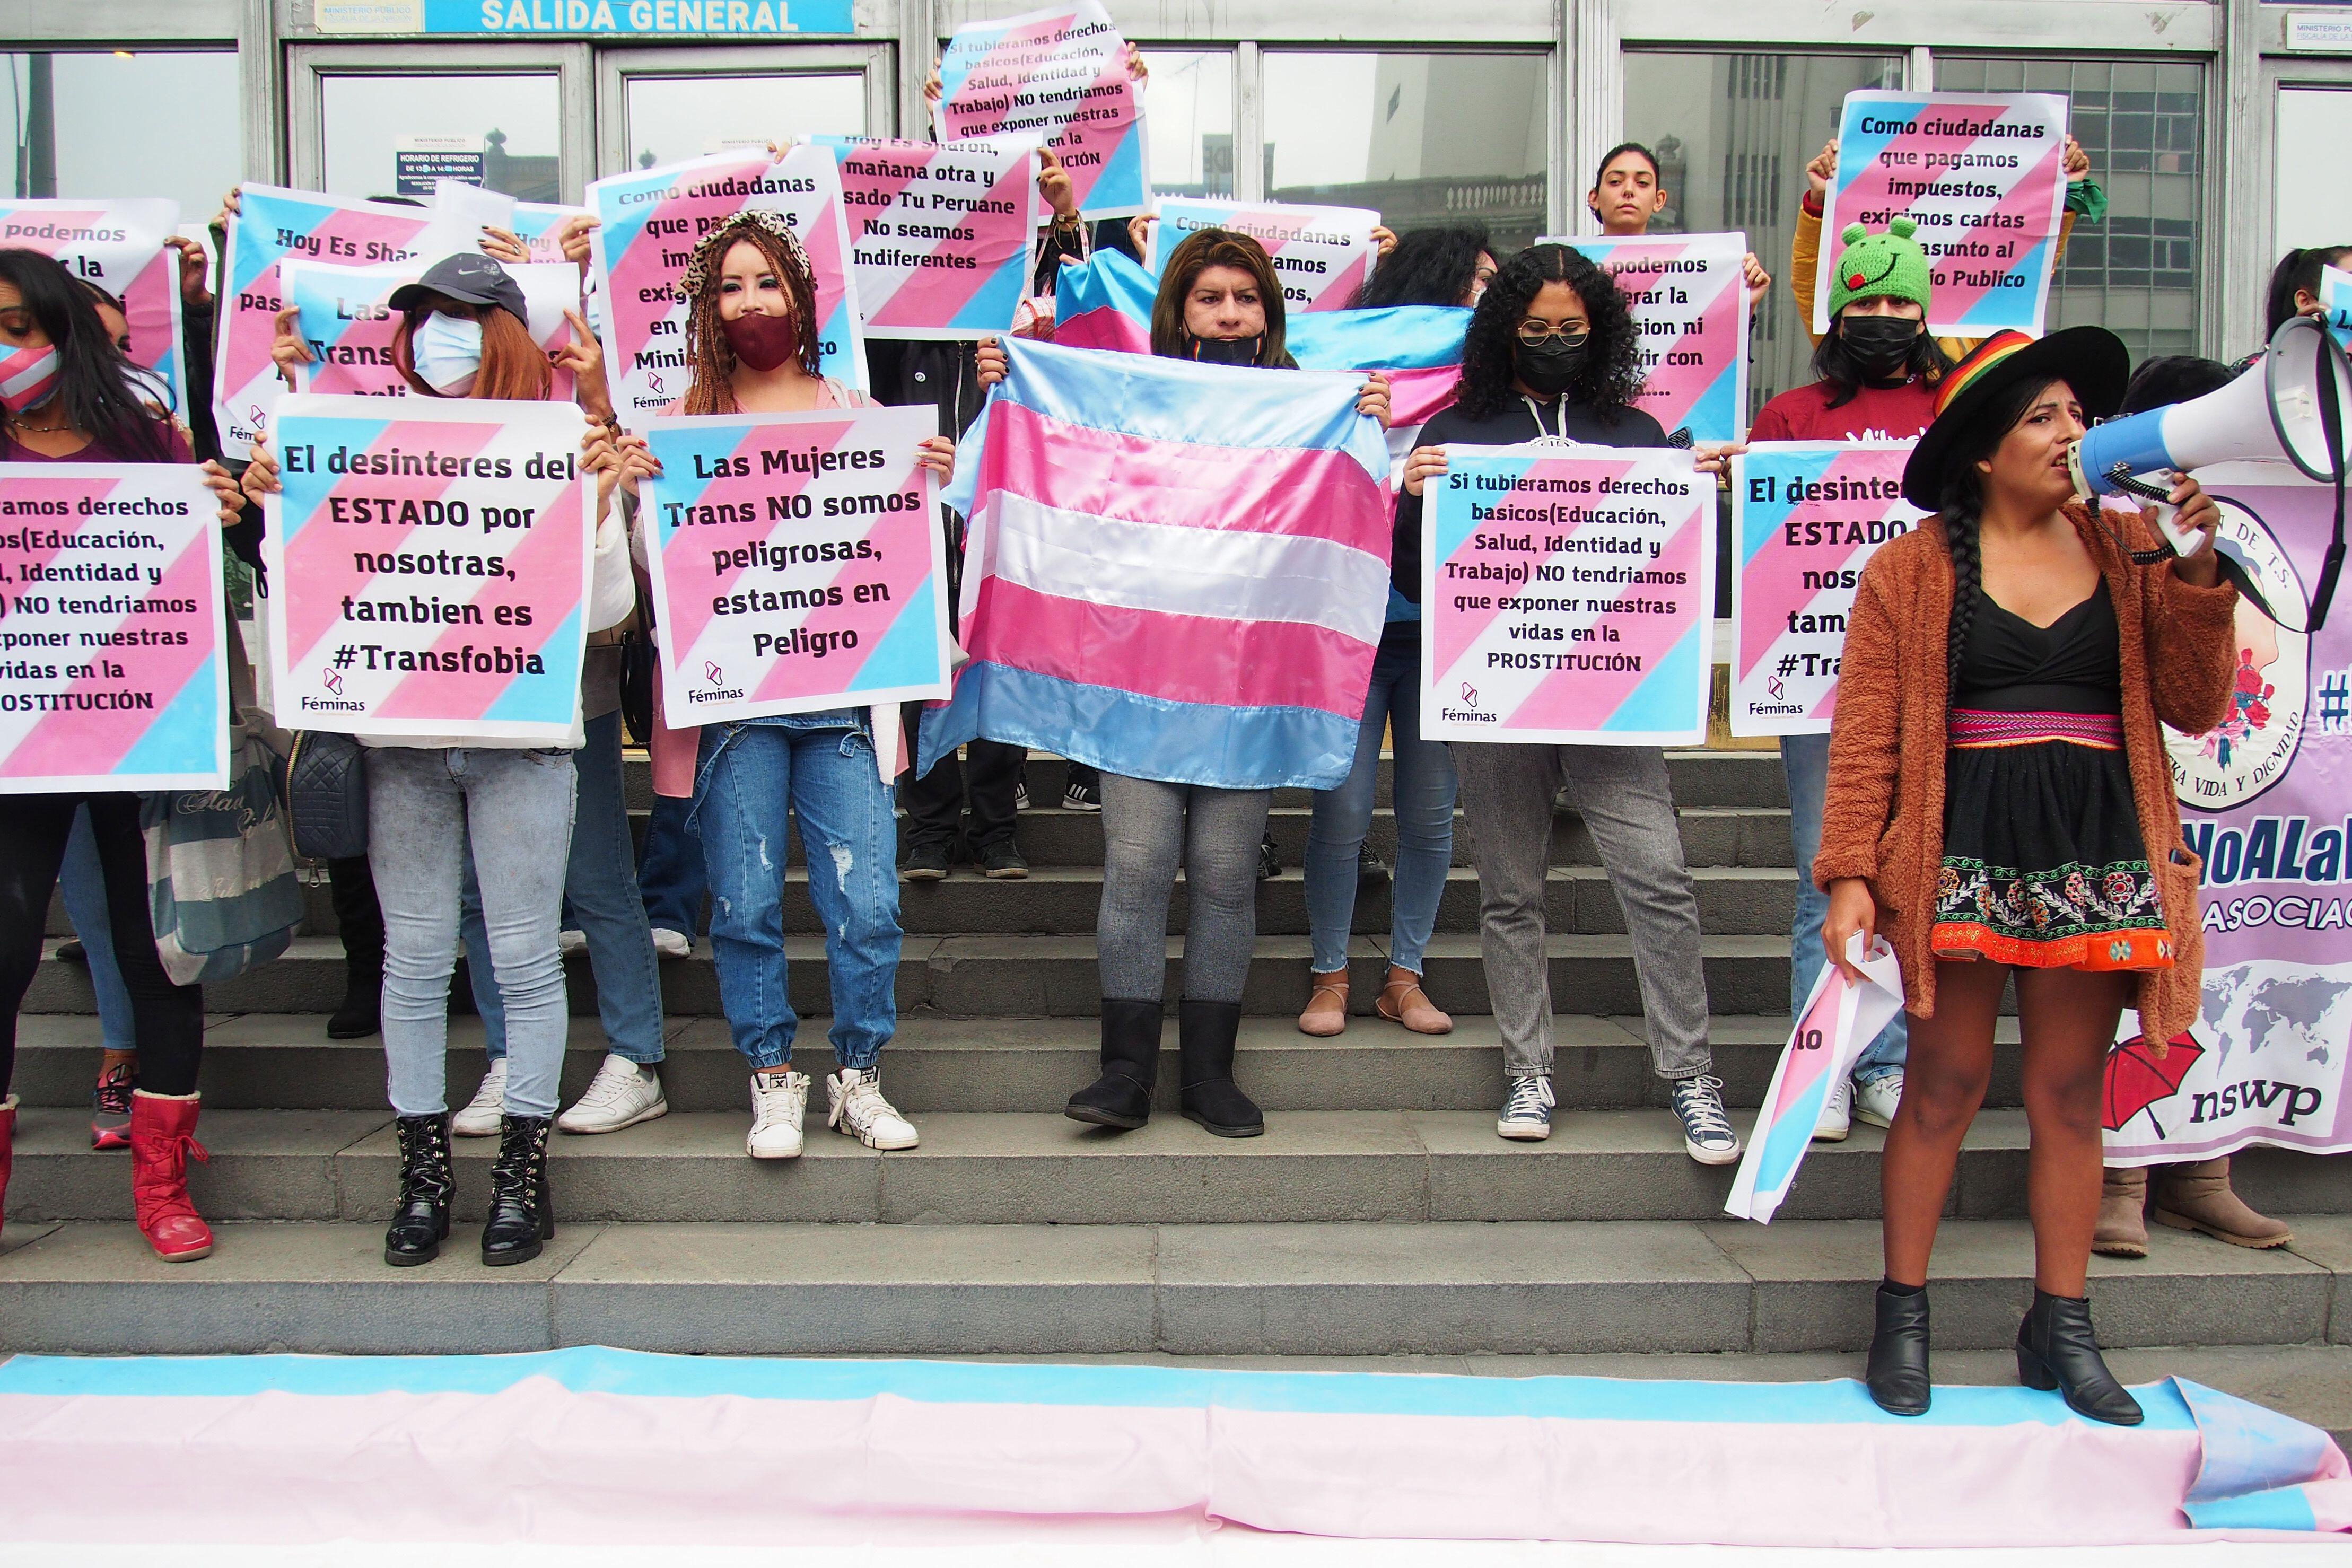 Race and Equality and the National Association of Travestis and Transexuals  of Brazil (ANTRA) ask the Inter-American Commission on Human Rights (IACHR)  to publicly denounce the increase in murders of transgender people